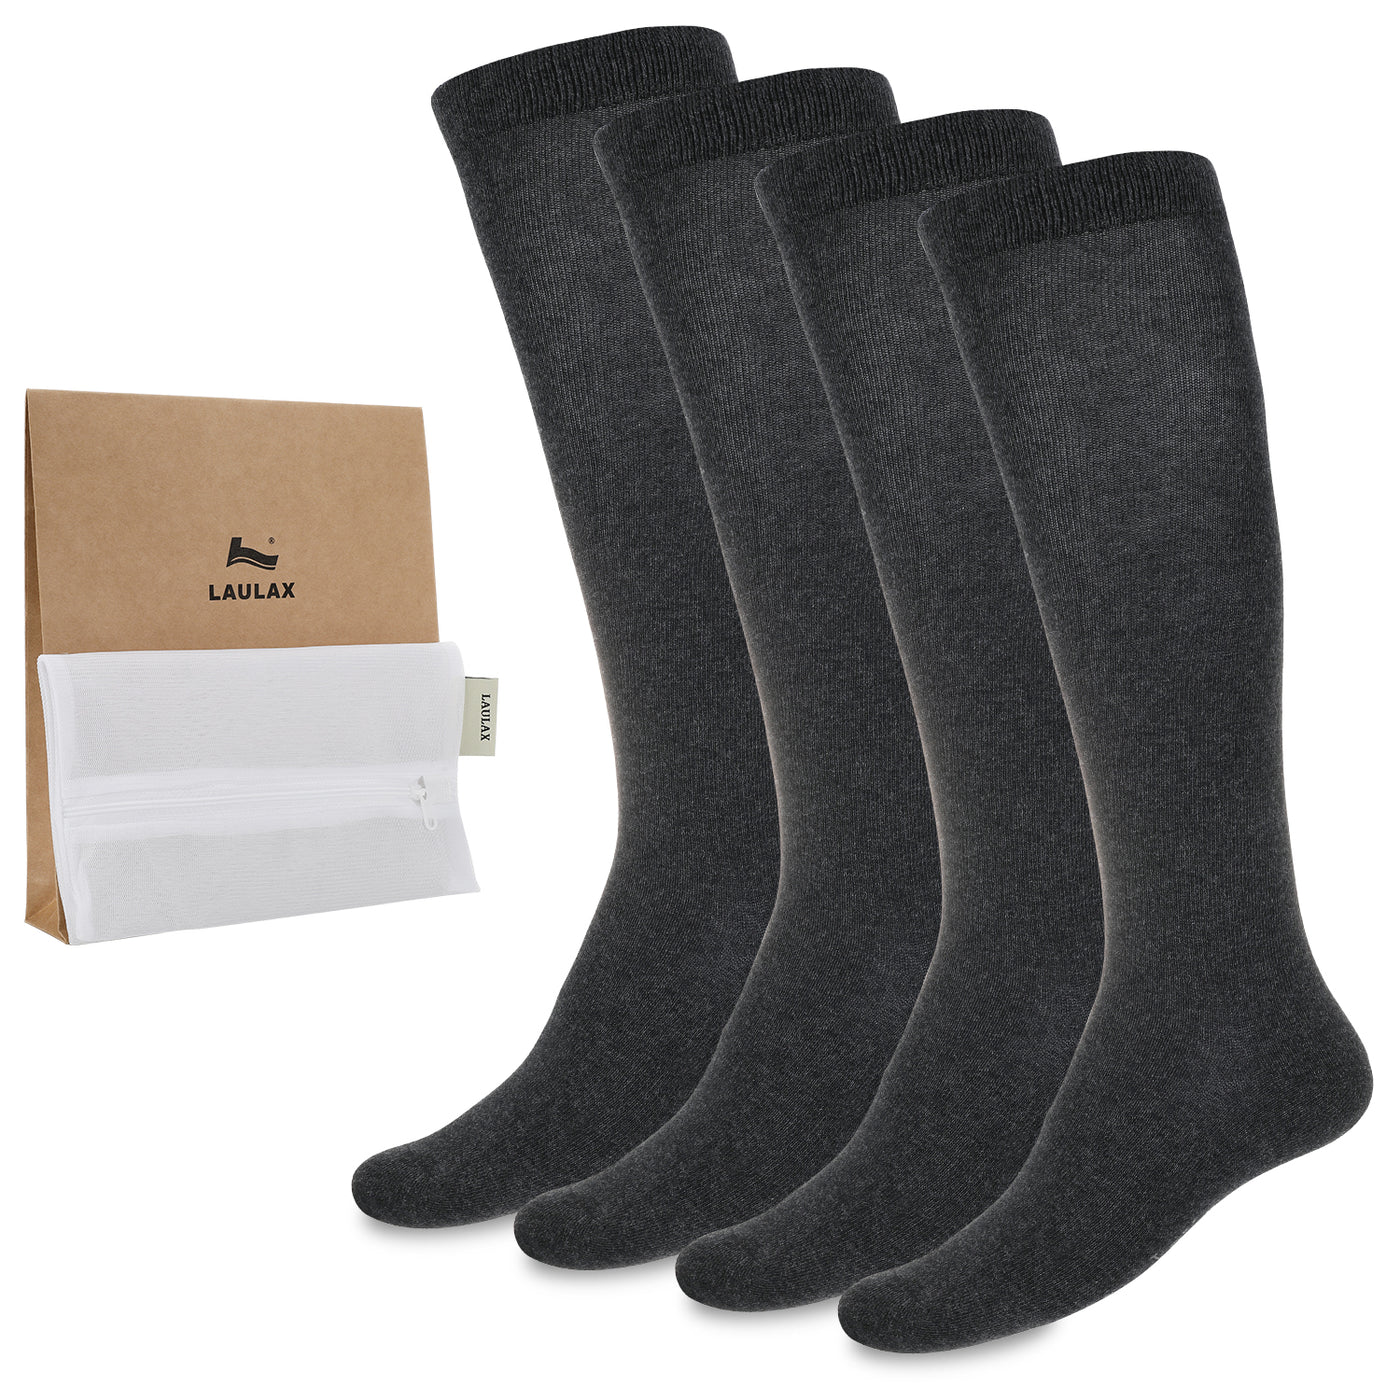 Laulax 4 Pairs Finest Combed Cotton Smooth Seamless Toe Knee High Socks, Size UK 3 - 7 / Europe 36 - 40